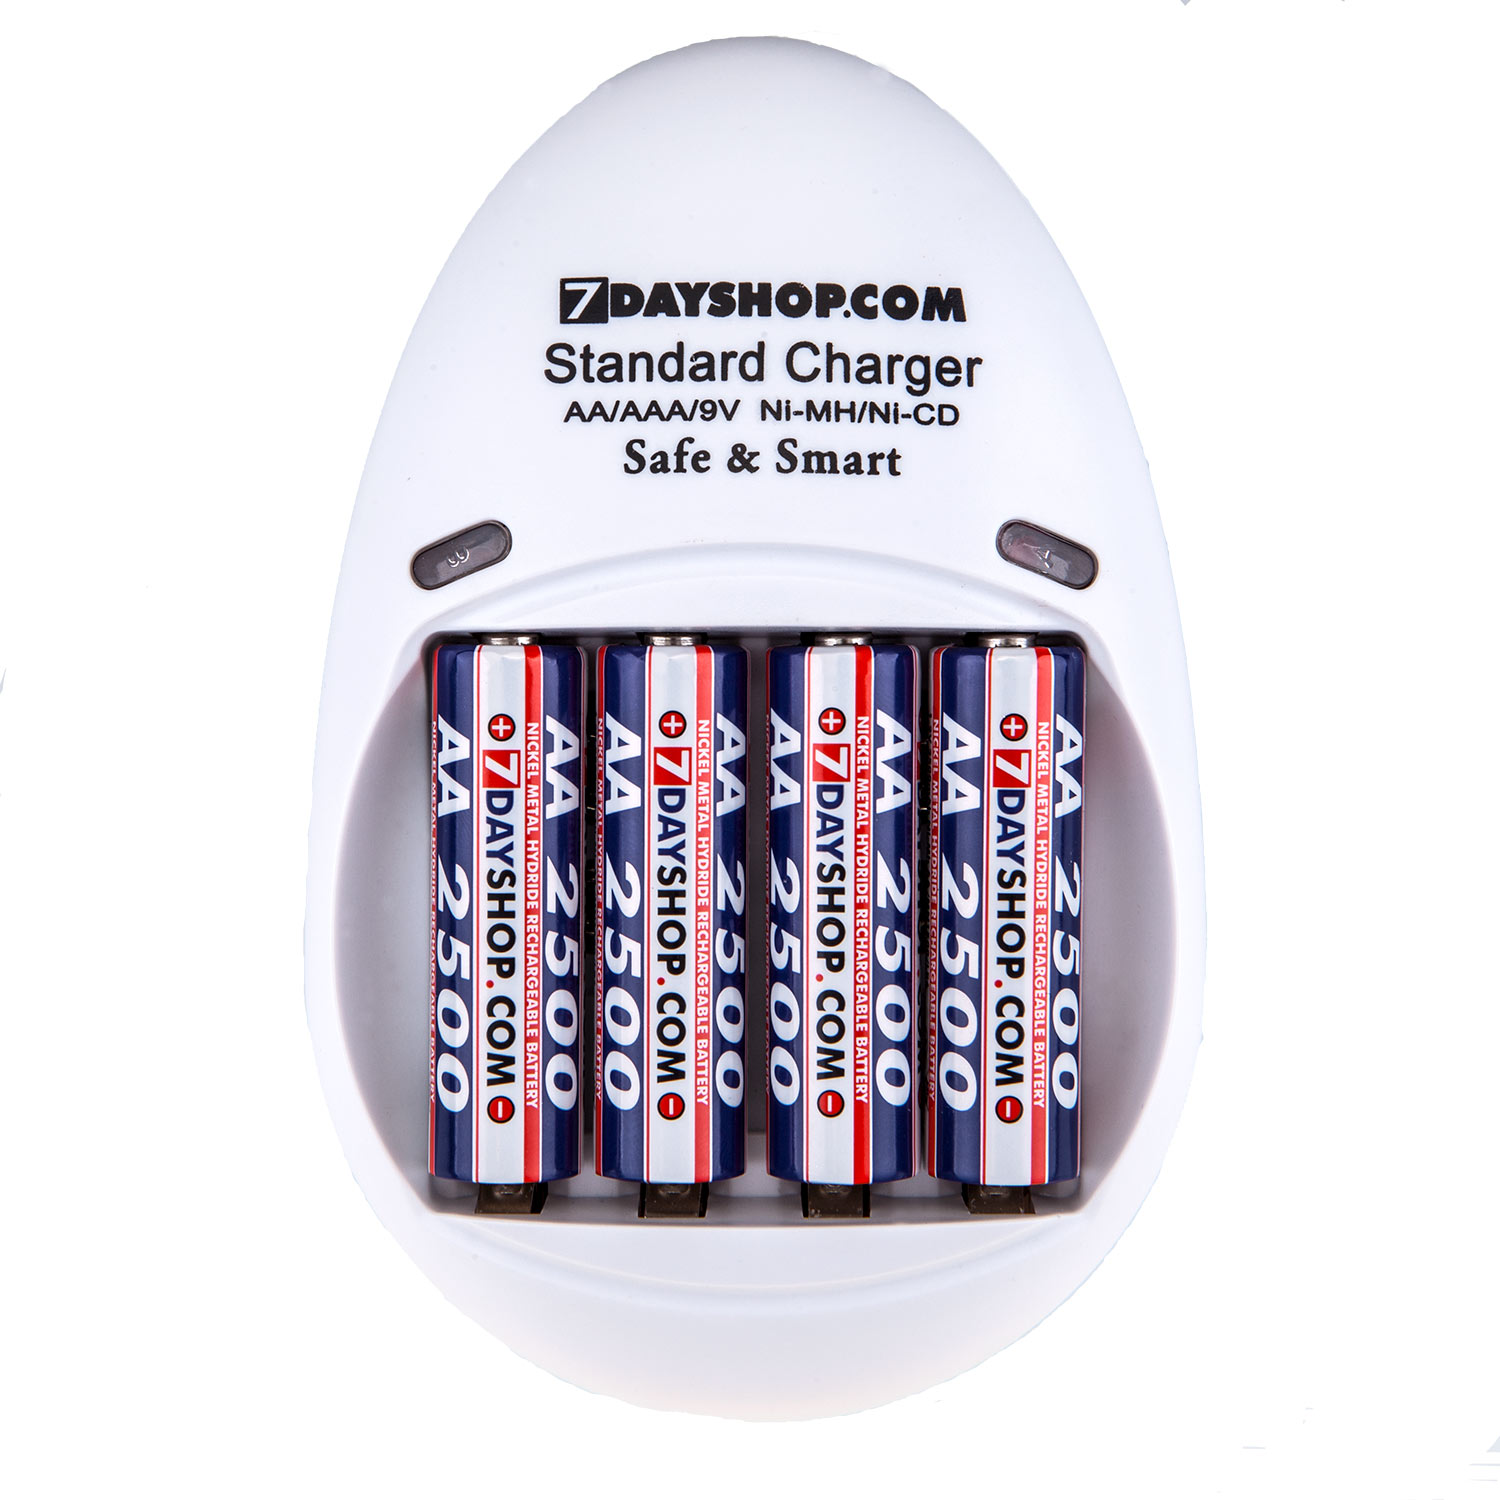 7DAYSHOP Battery Charger - Safe and Smart -